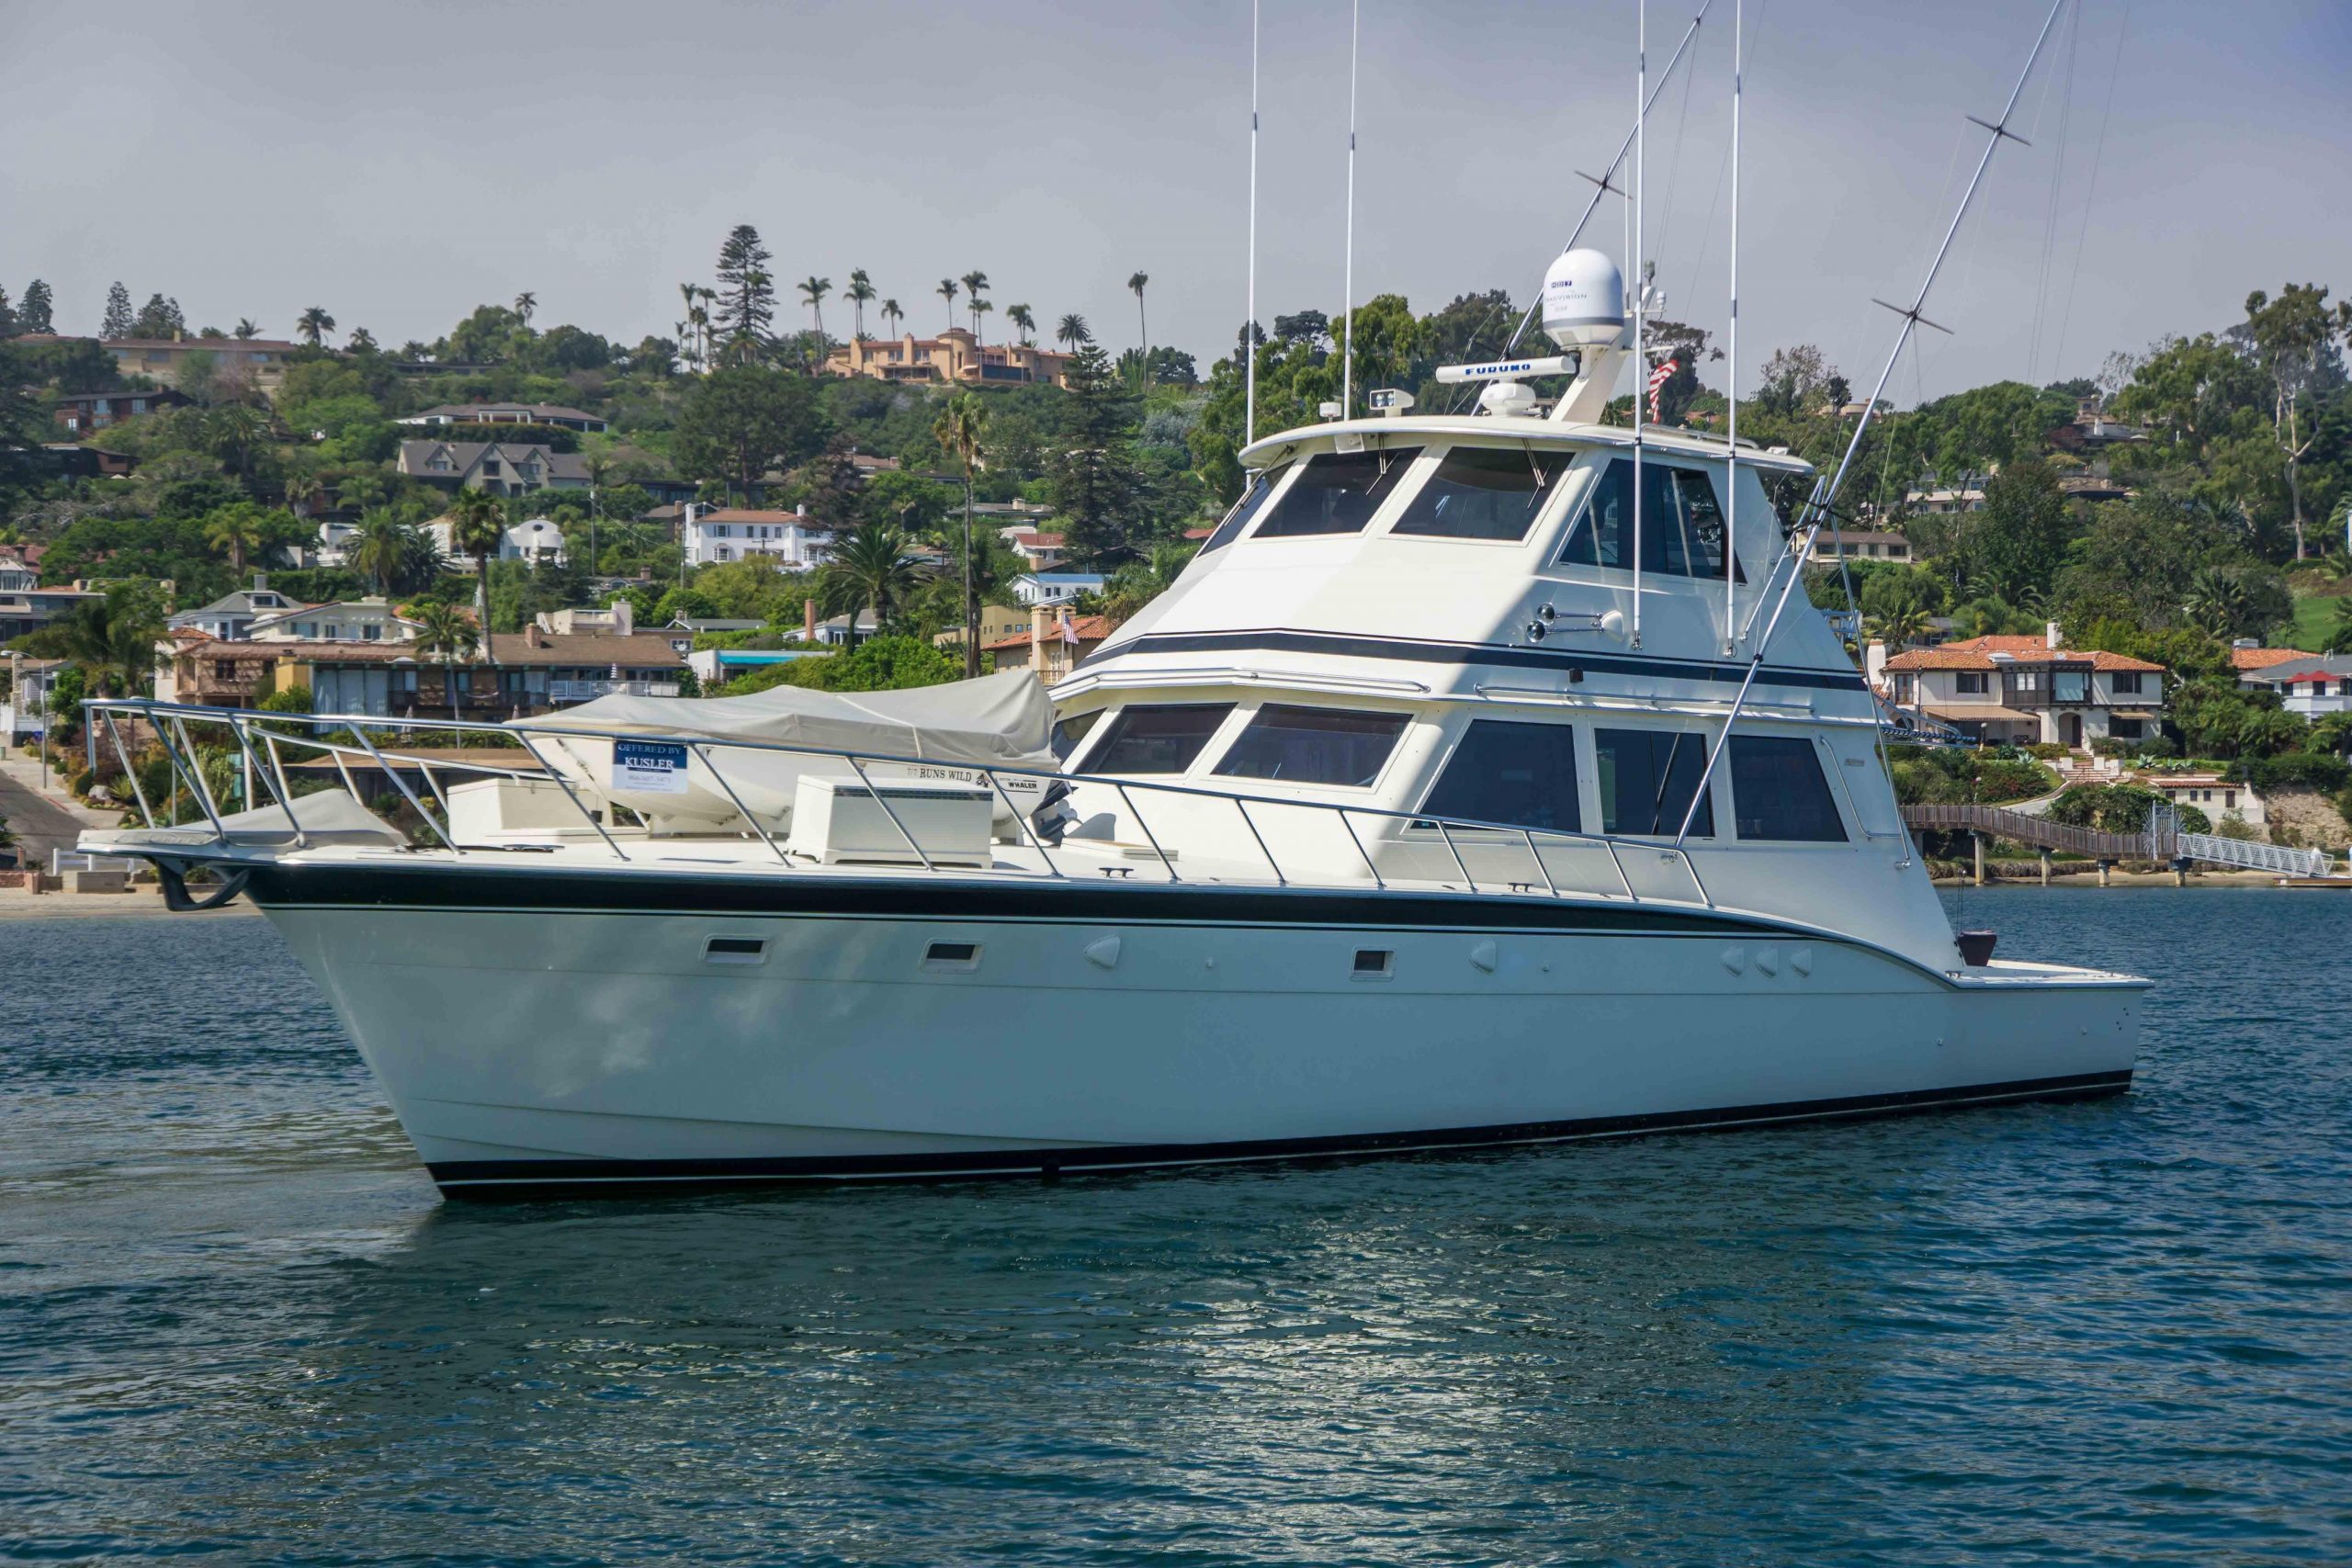 60 foot yacht for sale california